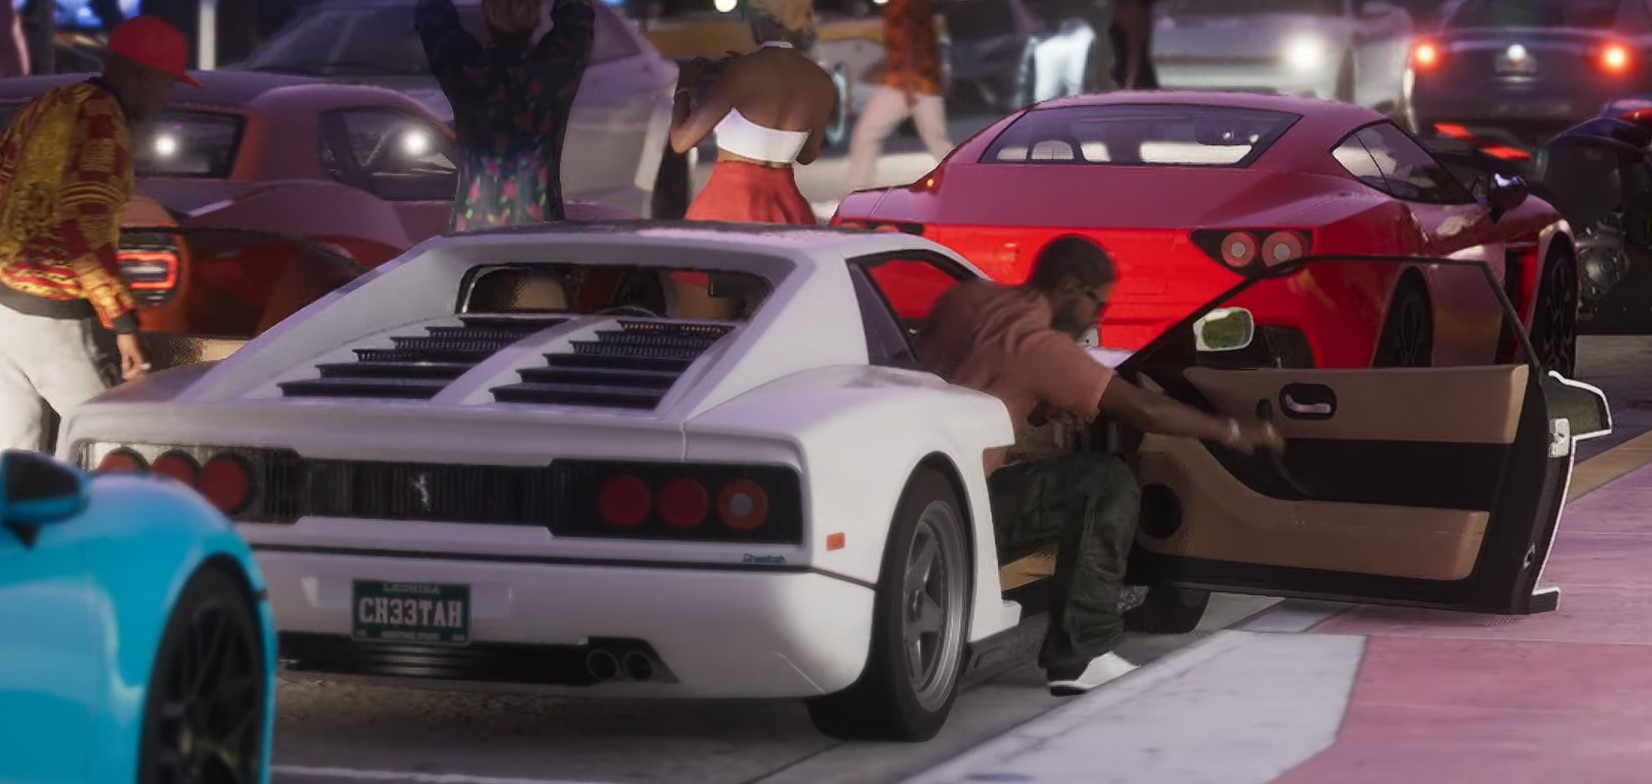 GTA 6 cars & vehicles' list seemingly confirmed by trailer and leaks